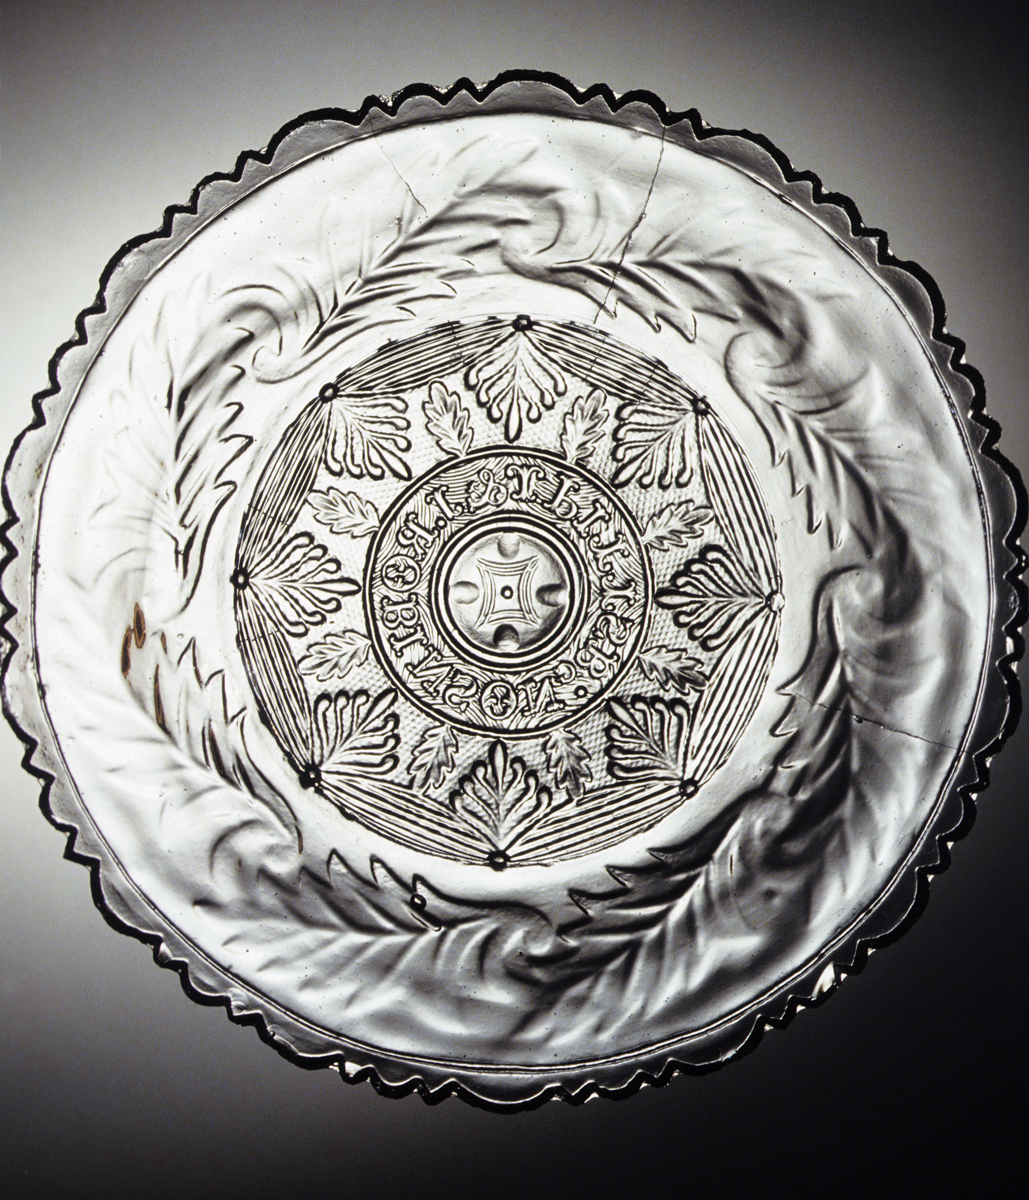 1978.0042 Colorless nonlead glass plate